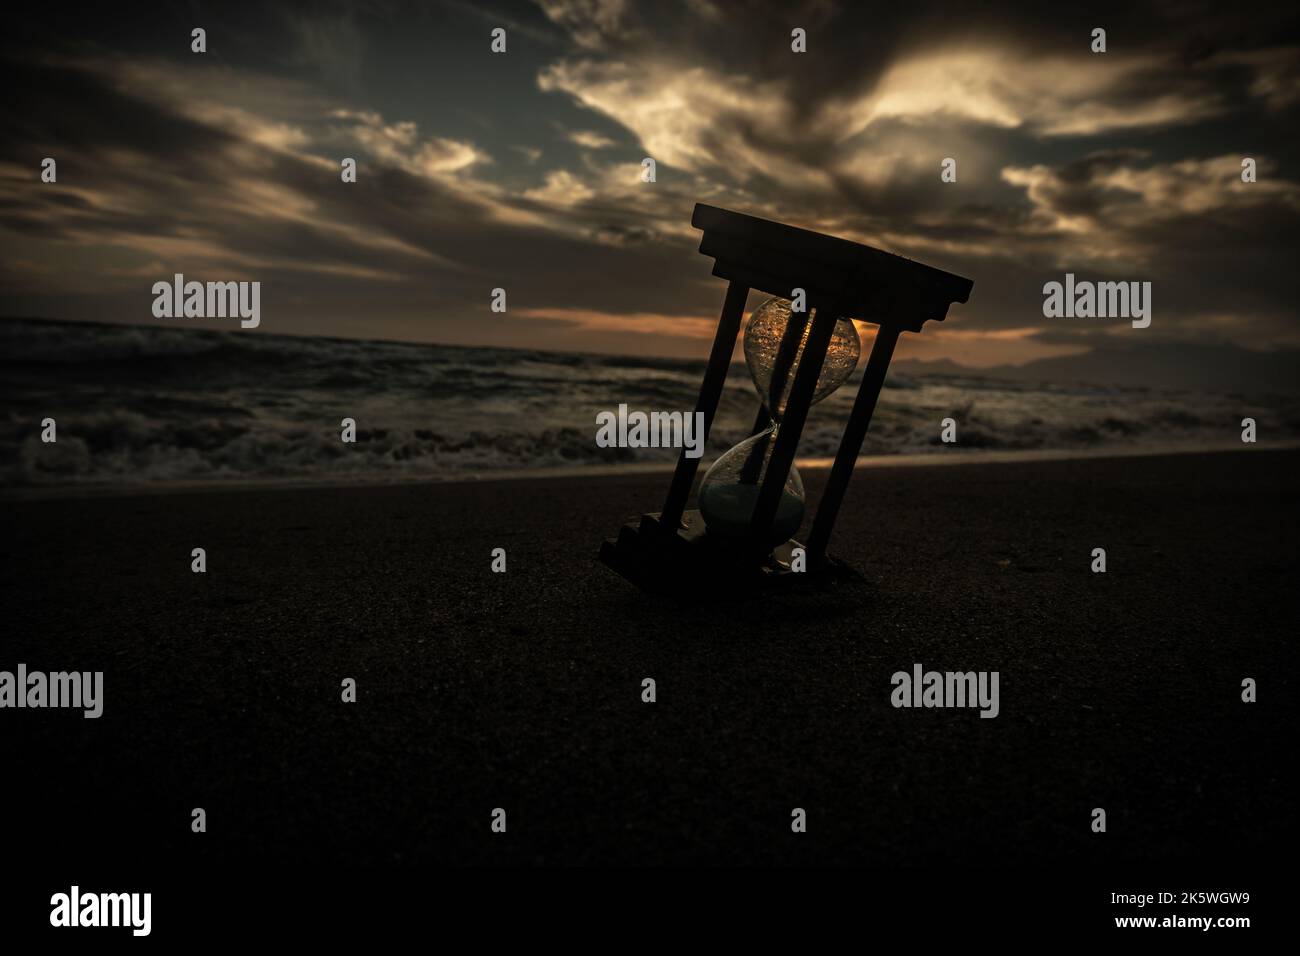 An hourglass sand on the beach at sunset, with a sea and sky as a background. Stock Photo